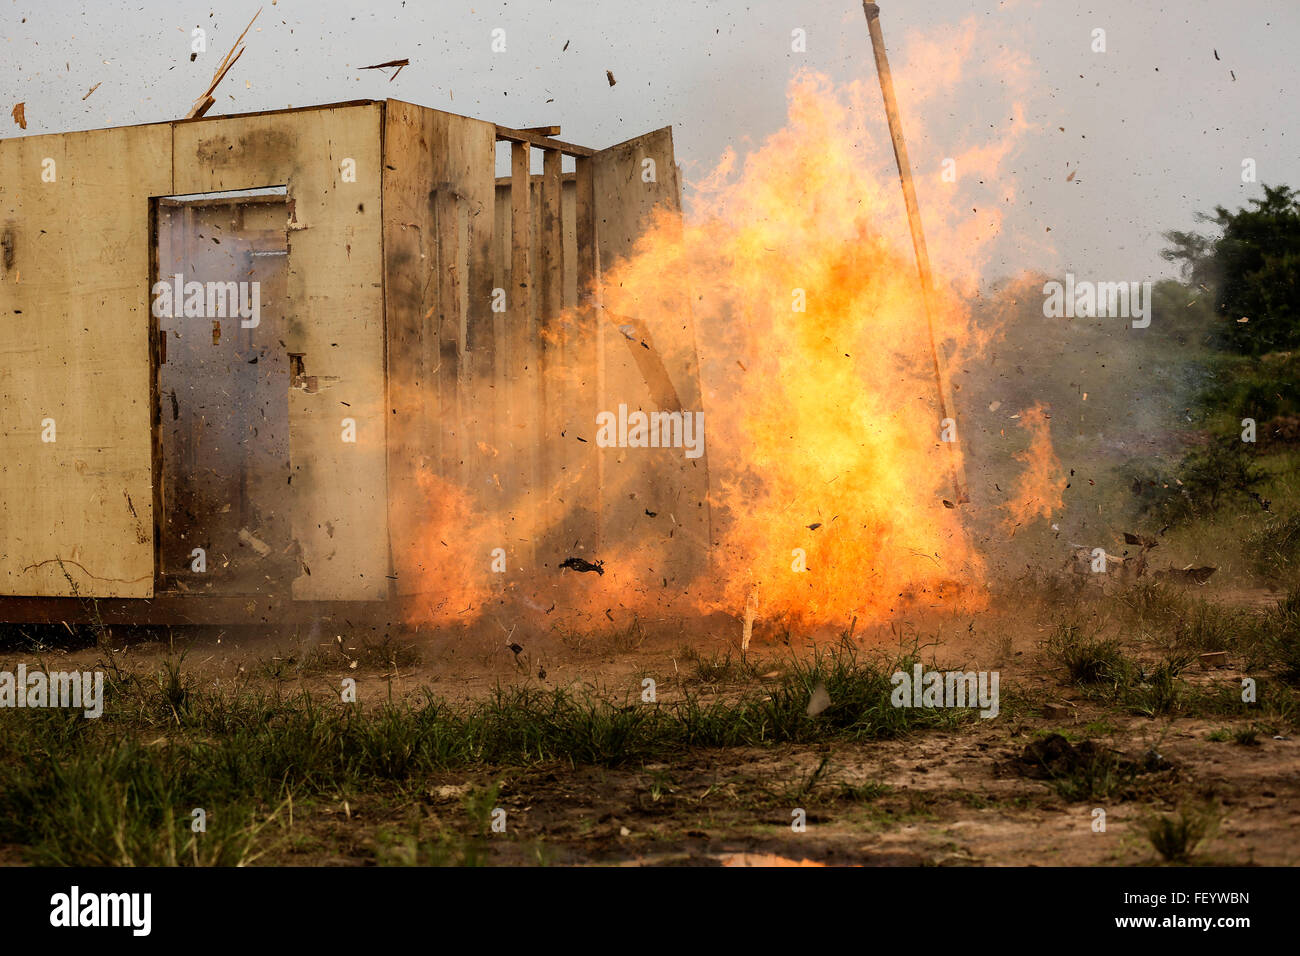 A Uganda People’s Defense Force soldier detonates an ‘oval charge’ on desired entry point while the team seeks cover around the corner of the building. This type of charge is used to create a hole through a wall when there is no available entrance or for the element of surprise. The Marines and UPDF improved breaching capabilities as they prepare for their African Union Mission in Somalia (AMISOM). Stock Photo